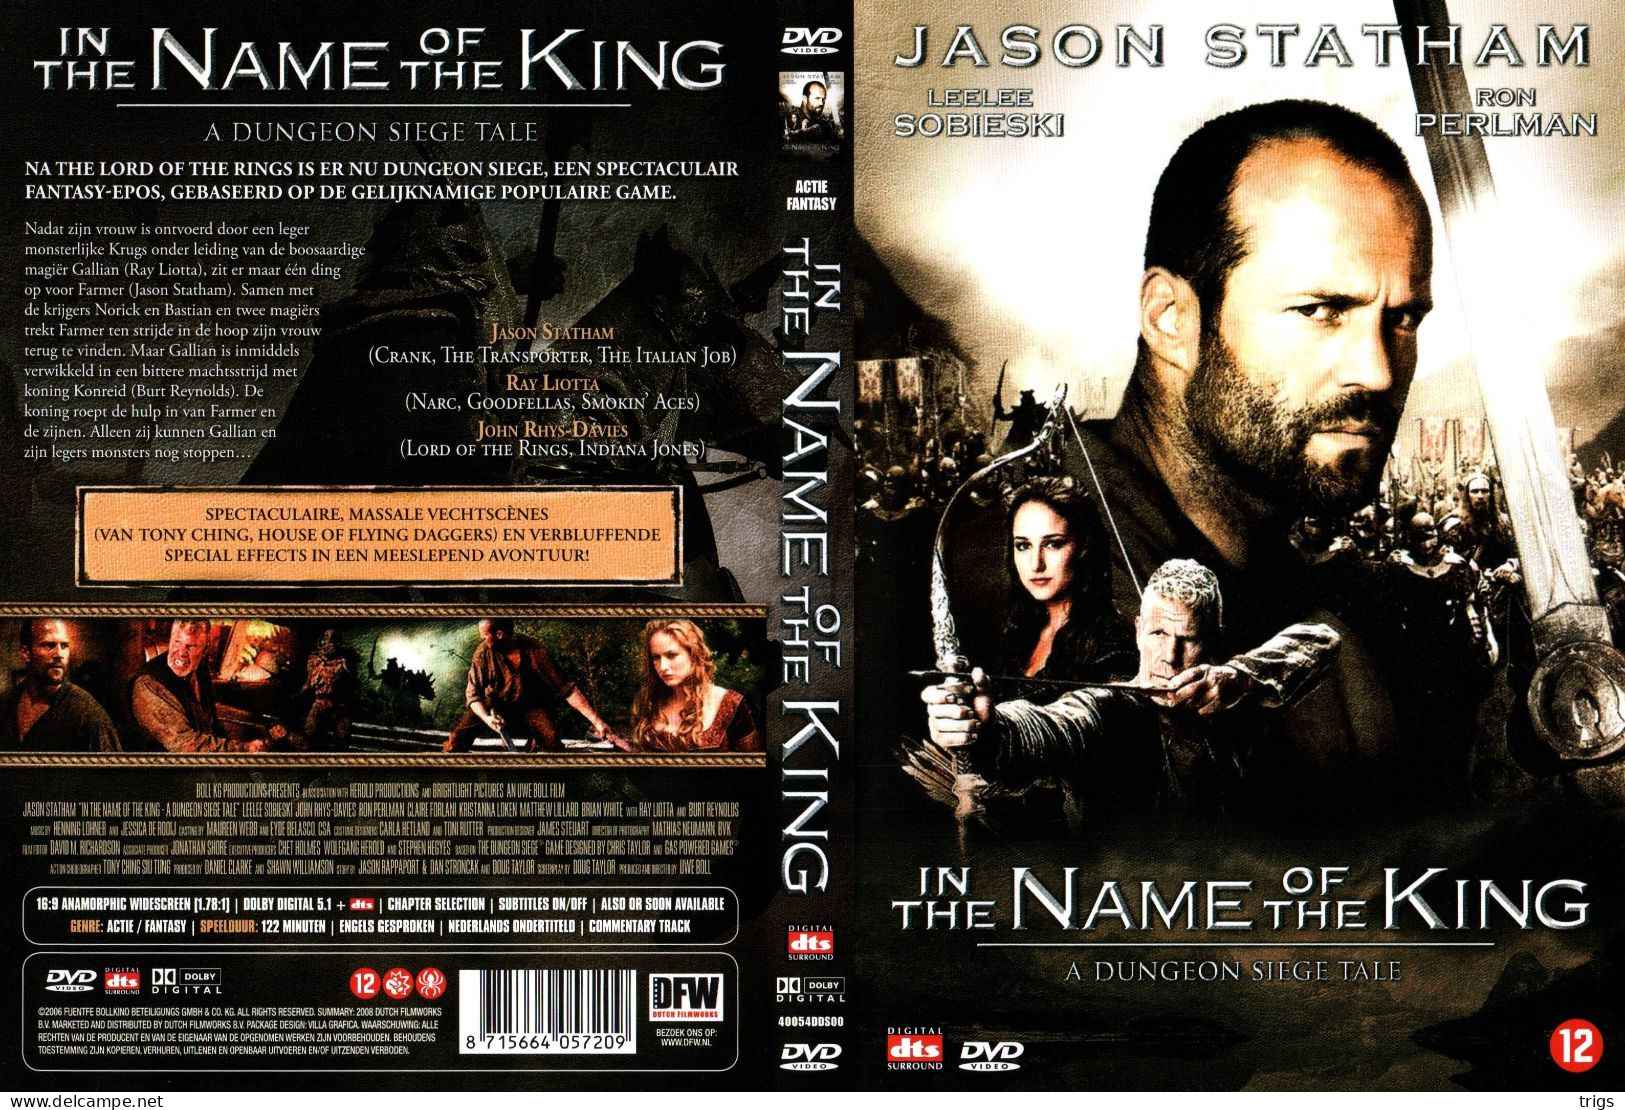 DVD - In The Name Of The King: A Dungeon Siege Tale - Azione, Avventura